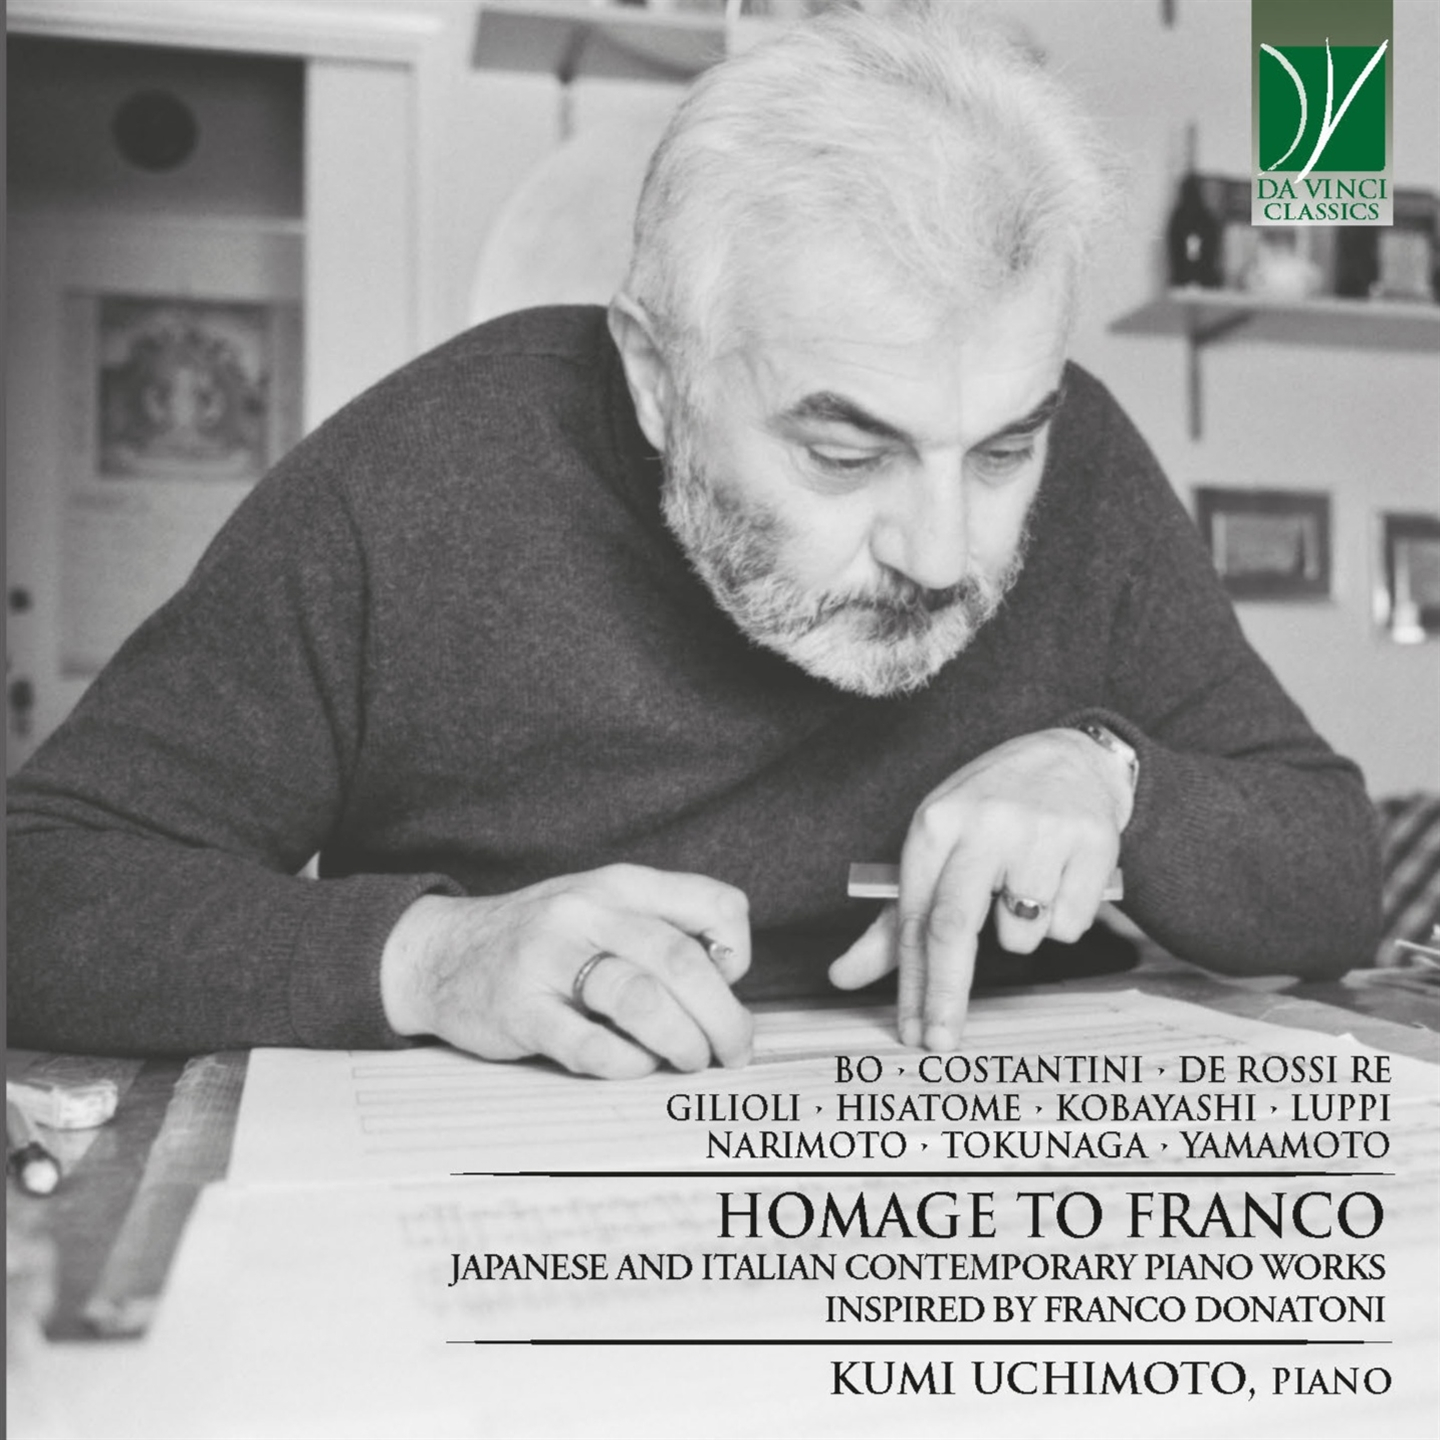 HOMAGE TO FRANCO: CONTEMPORARY PIANO WORKS INSPIRED BY FRANCO DONATONI